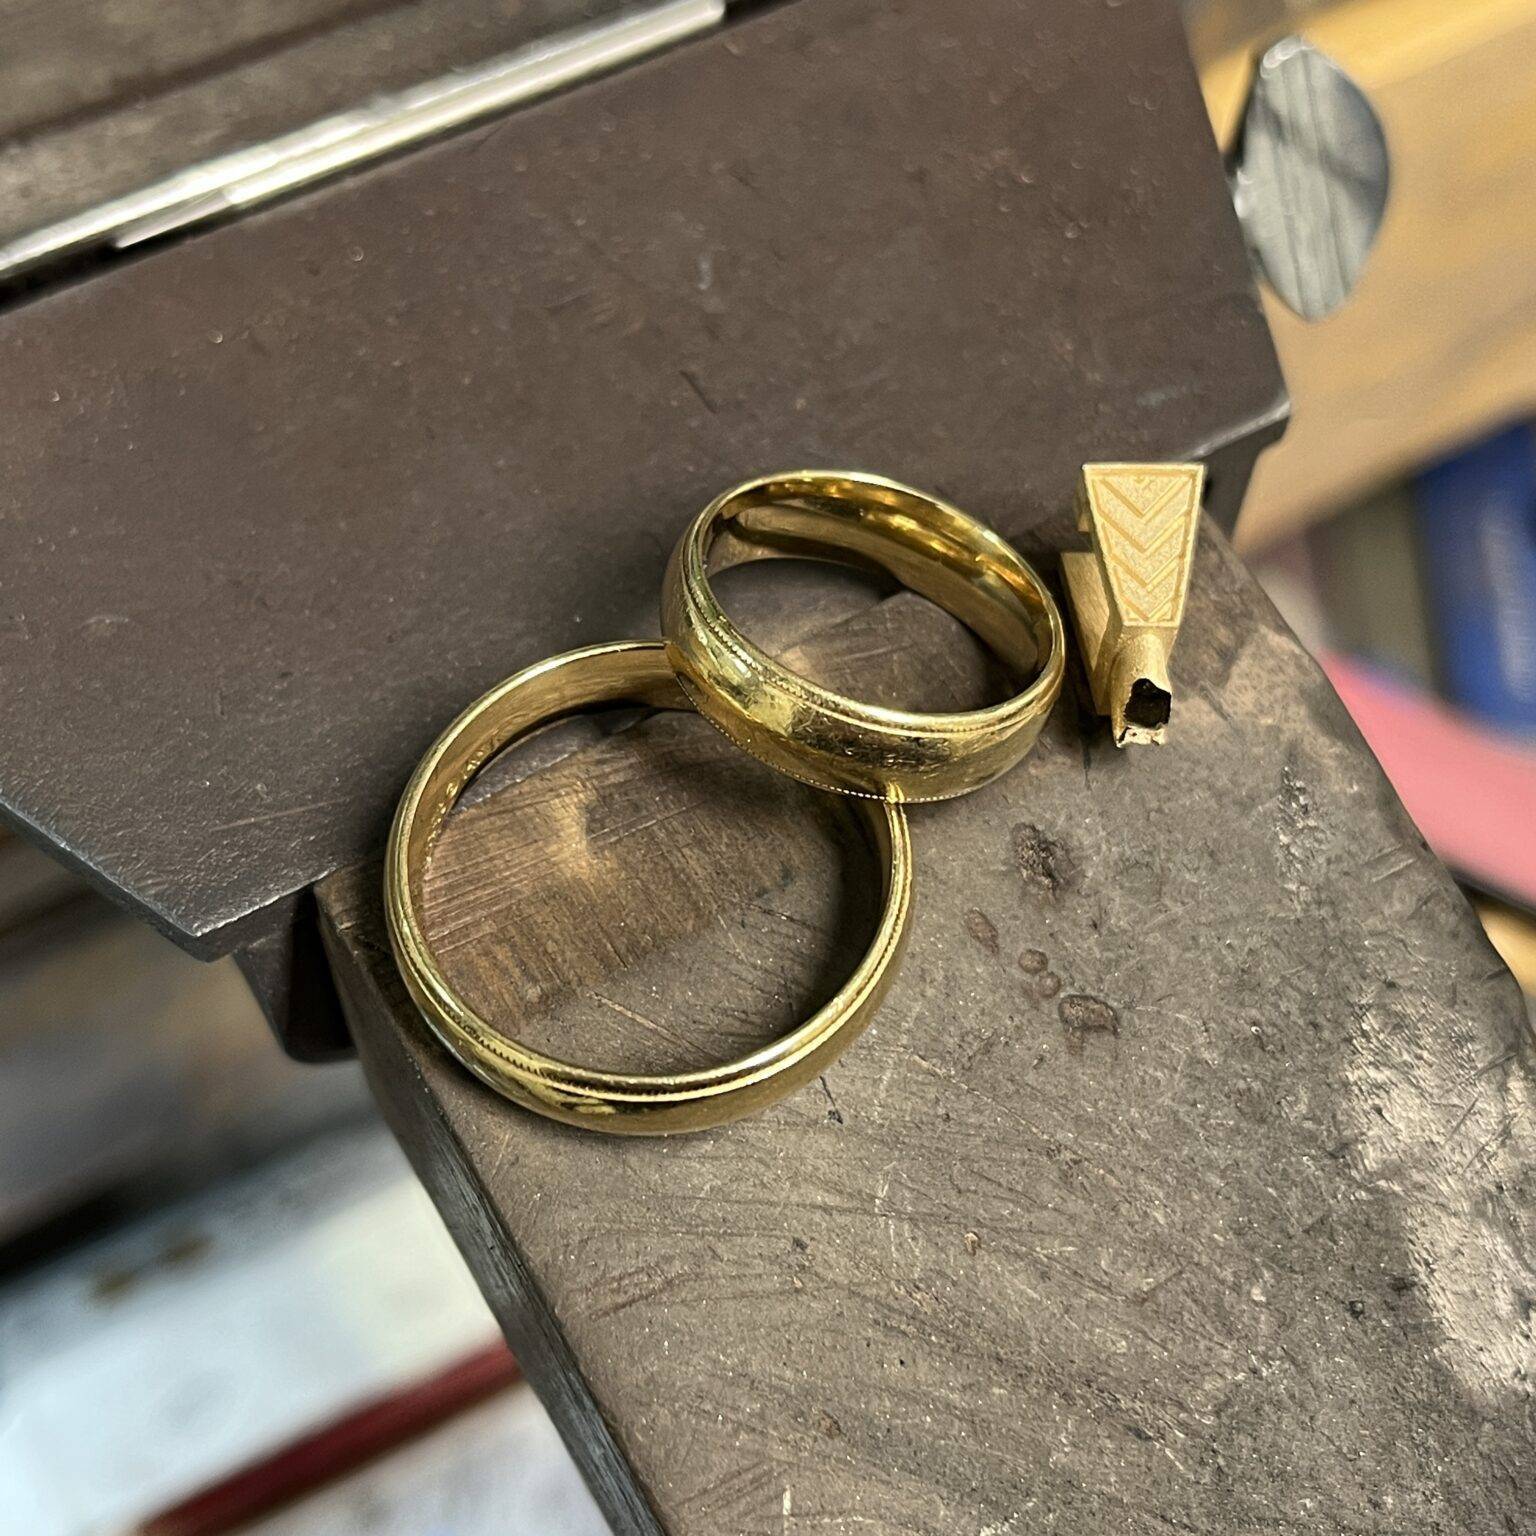 How to Repurpose Parents Wedding Rings - VAD